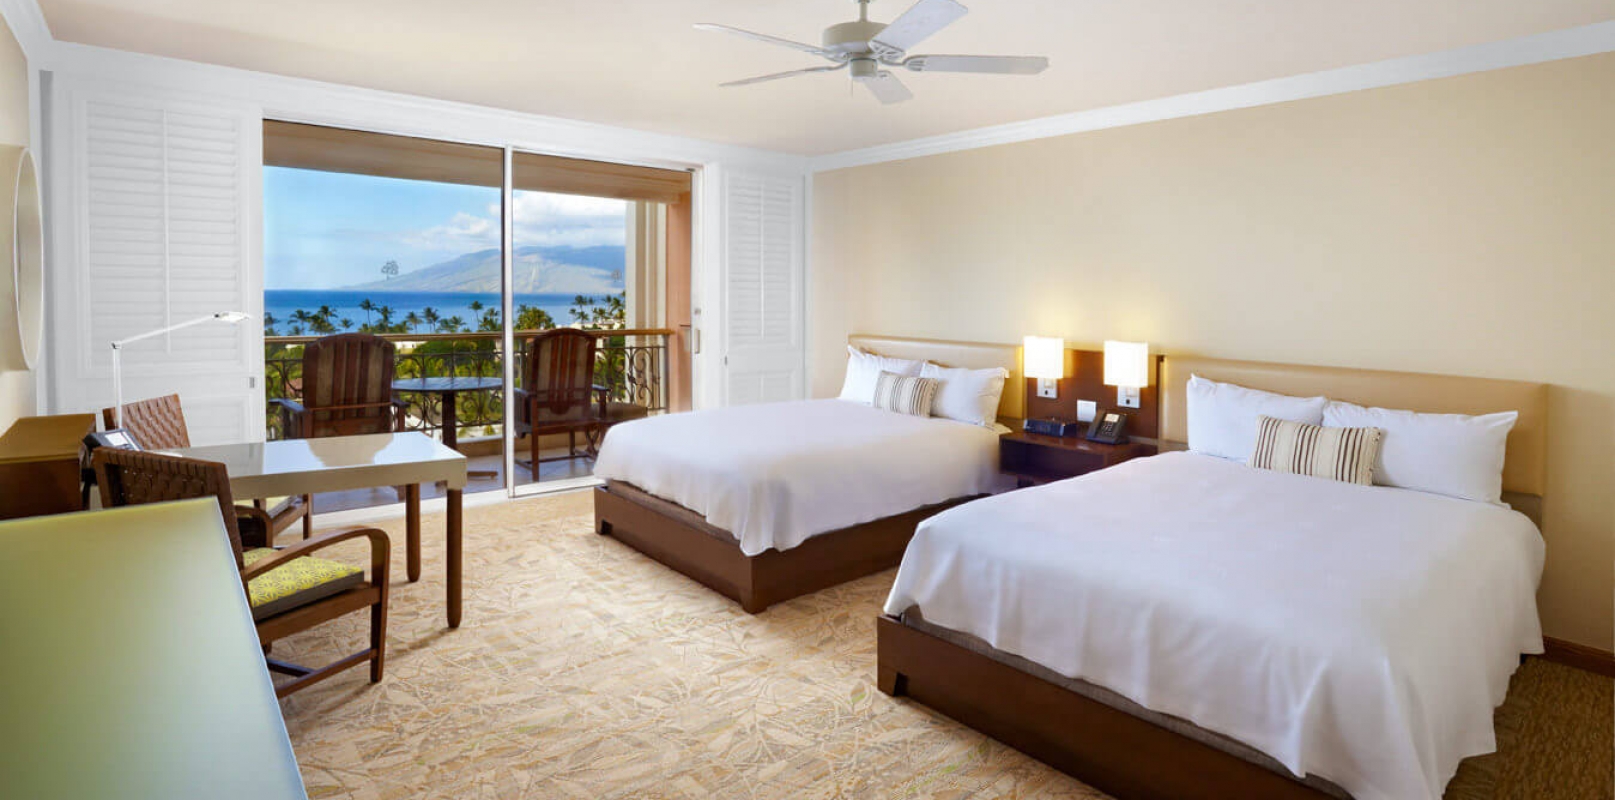 king bed and seating area in Grand Wailea room with patio doors give view of outside